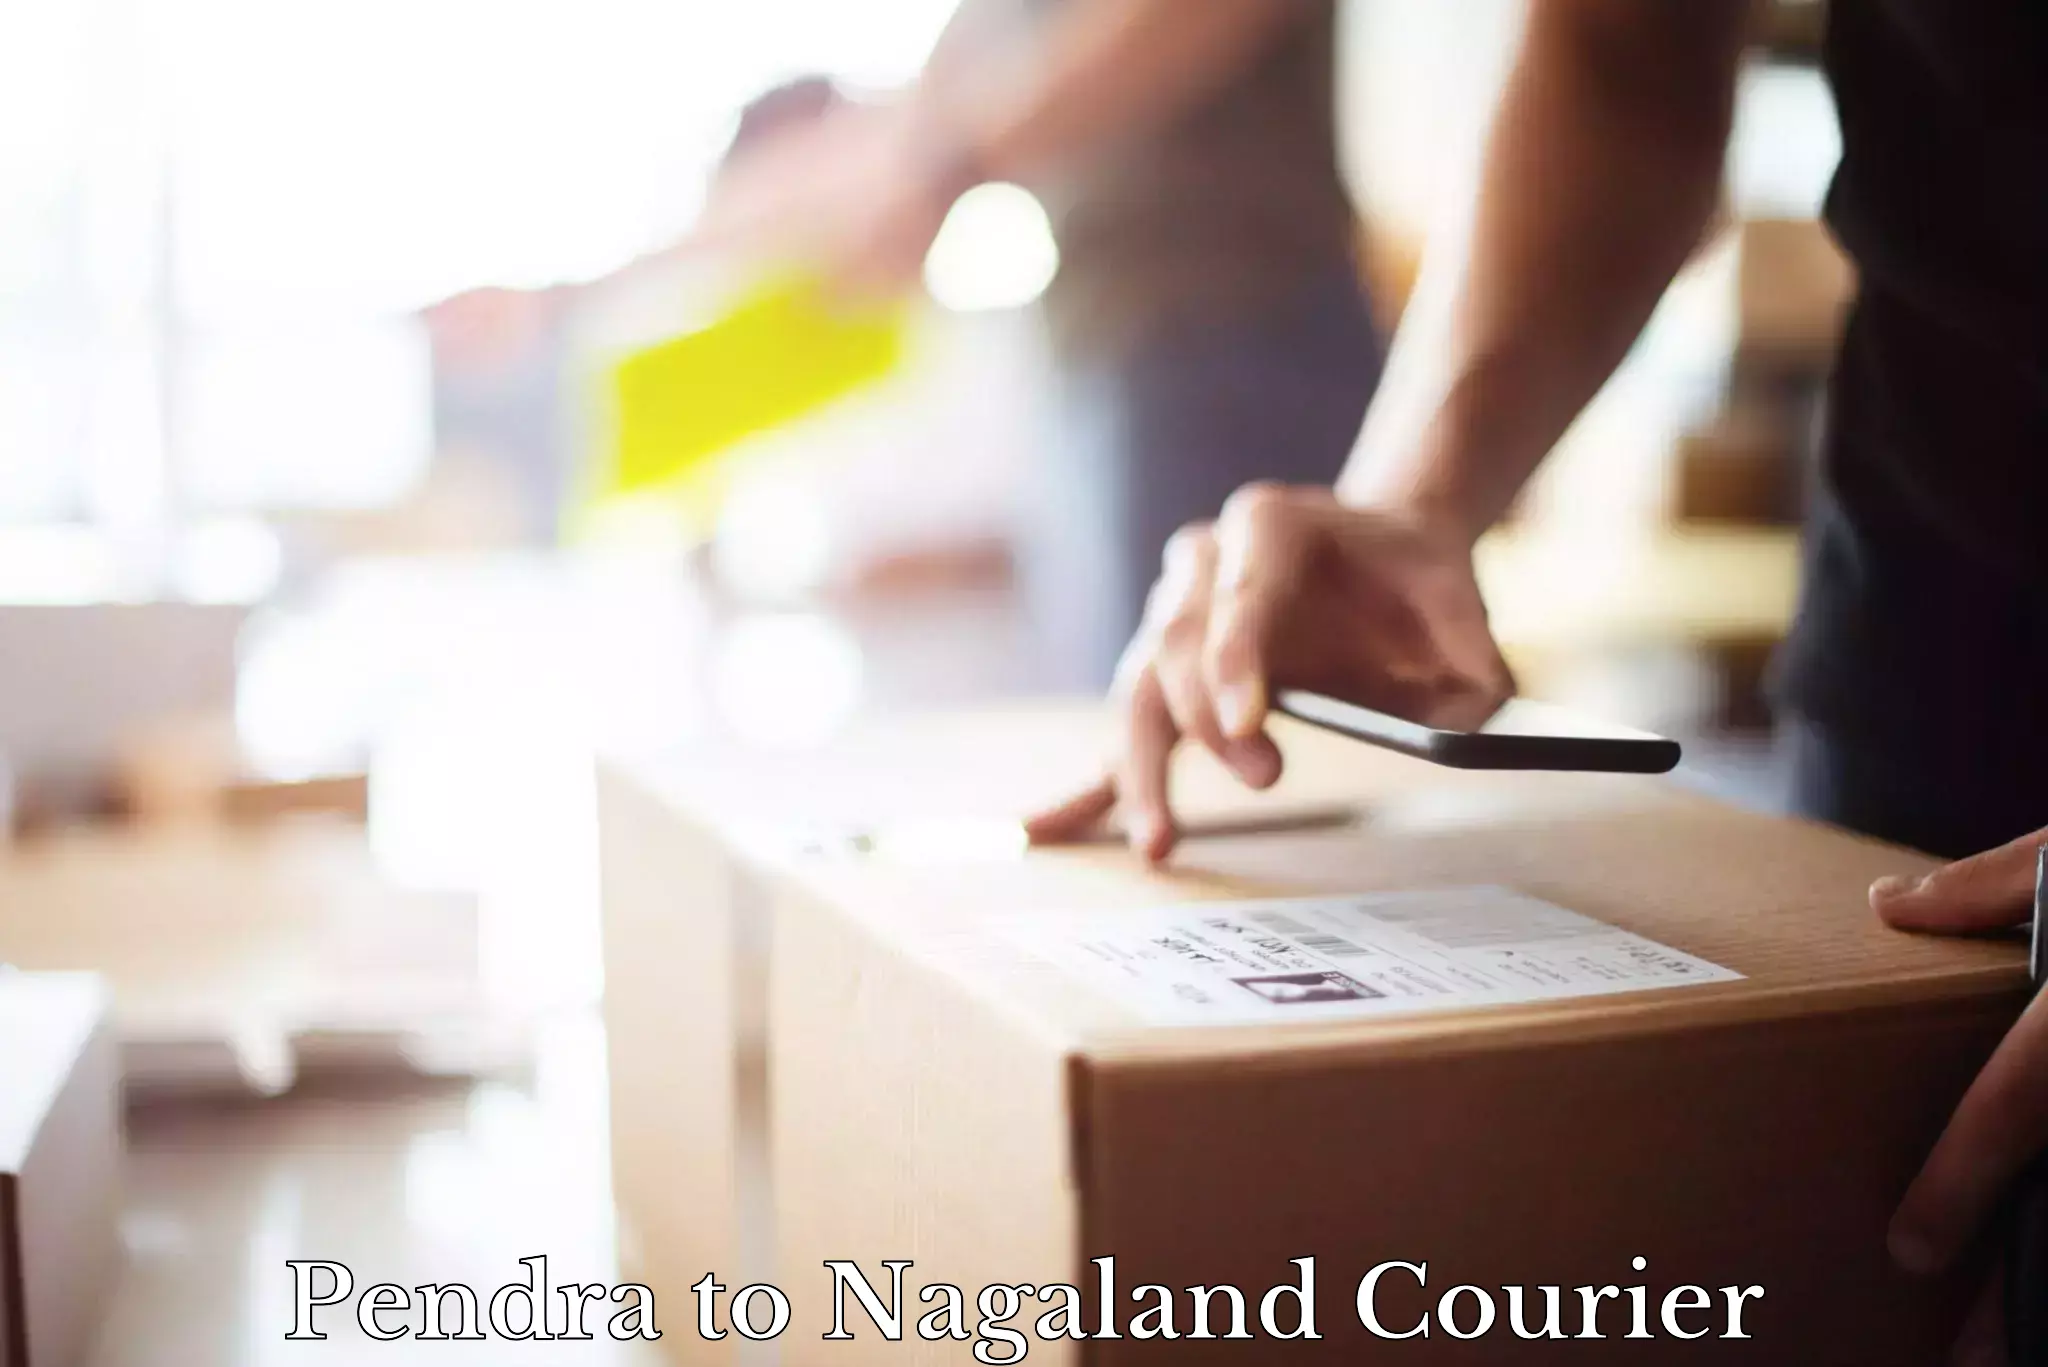 Courier rate comparison Pendra to Nagaland